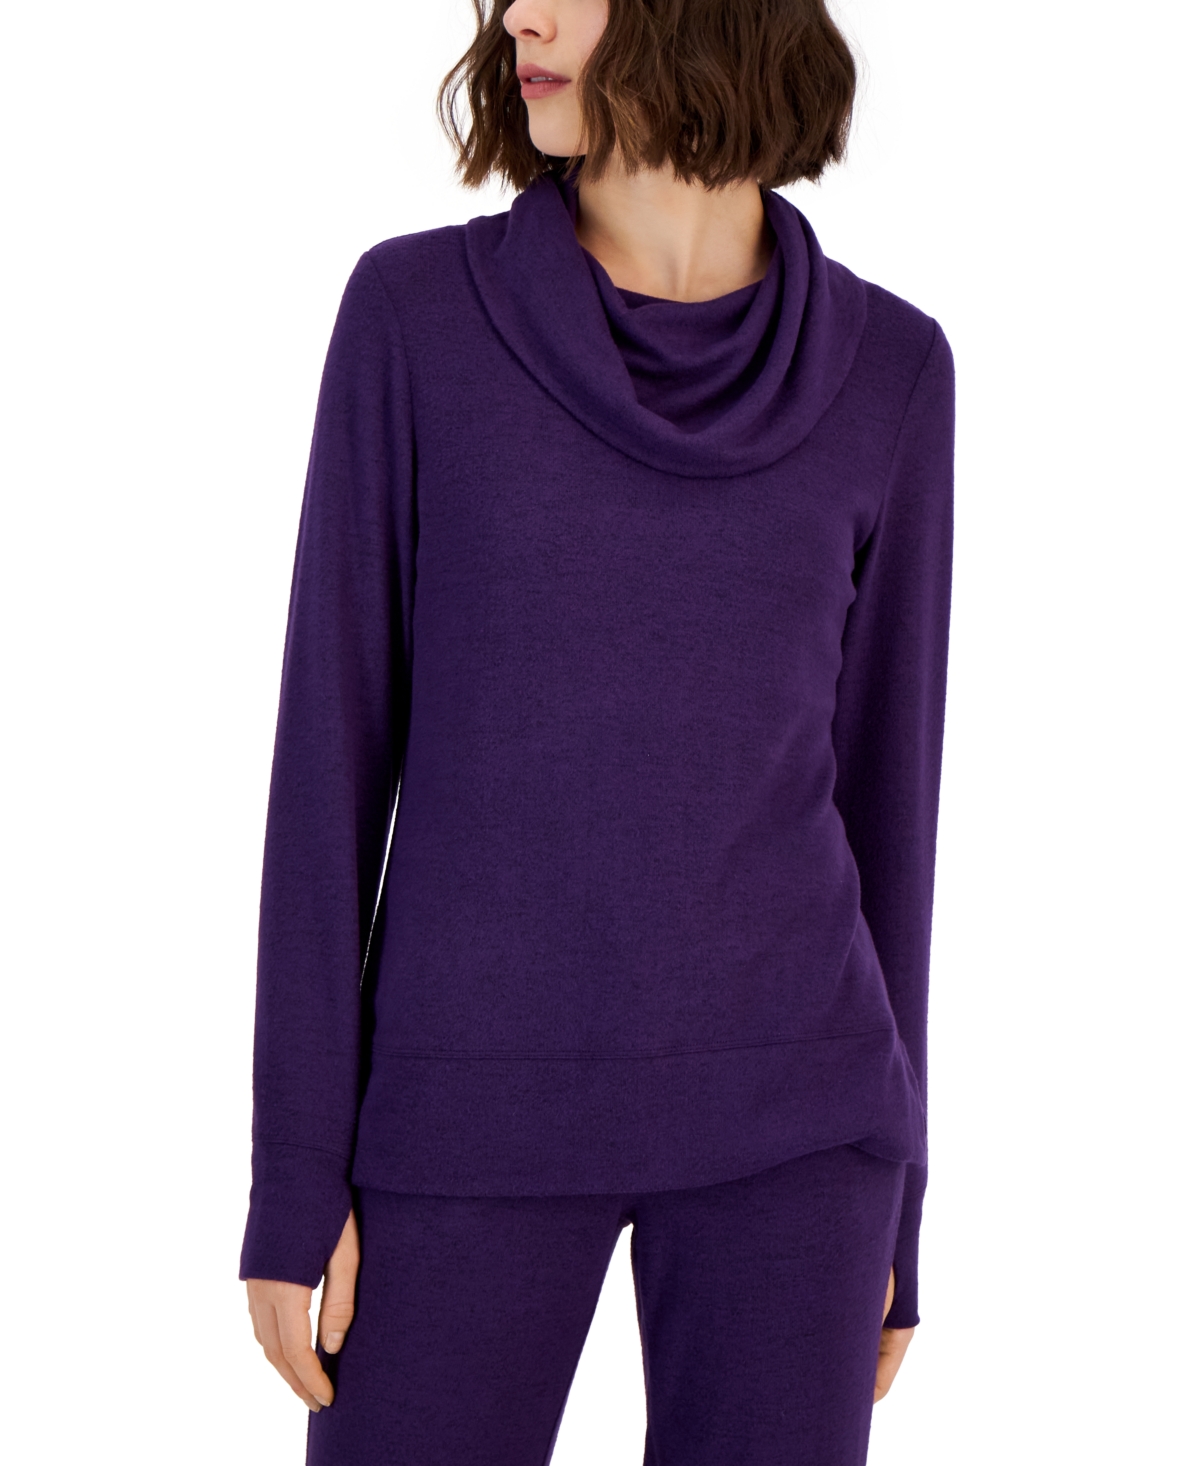  Id Ideology Women's Mushy Knit Cowlneck Top, Created for Macy's